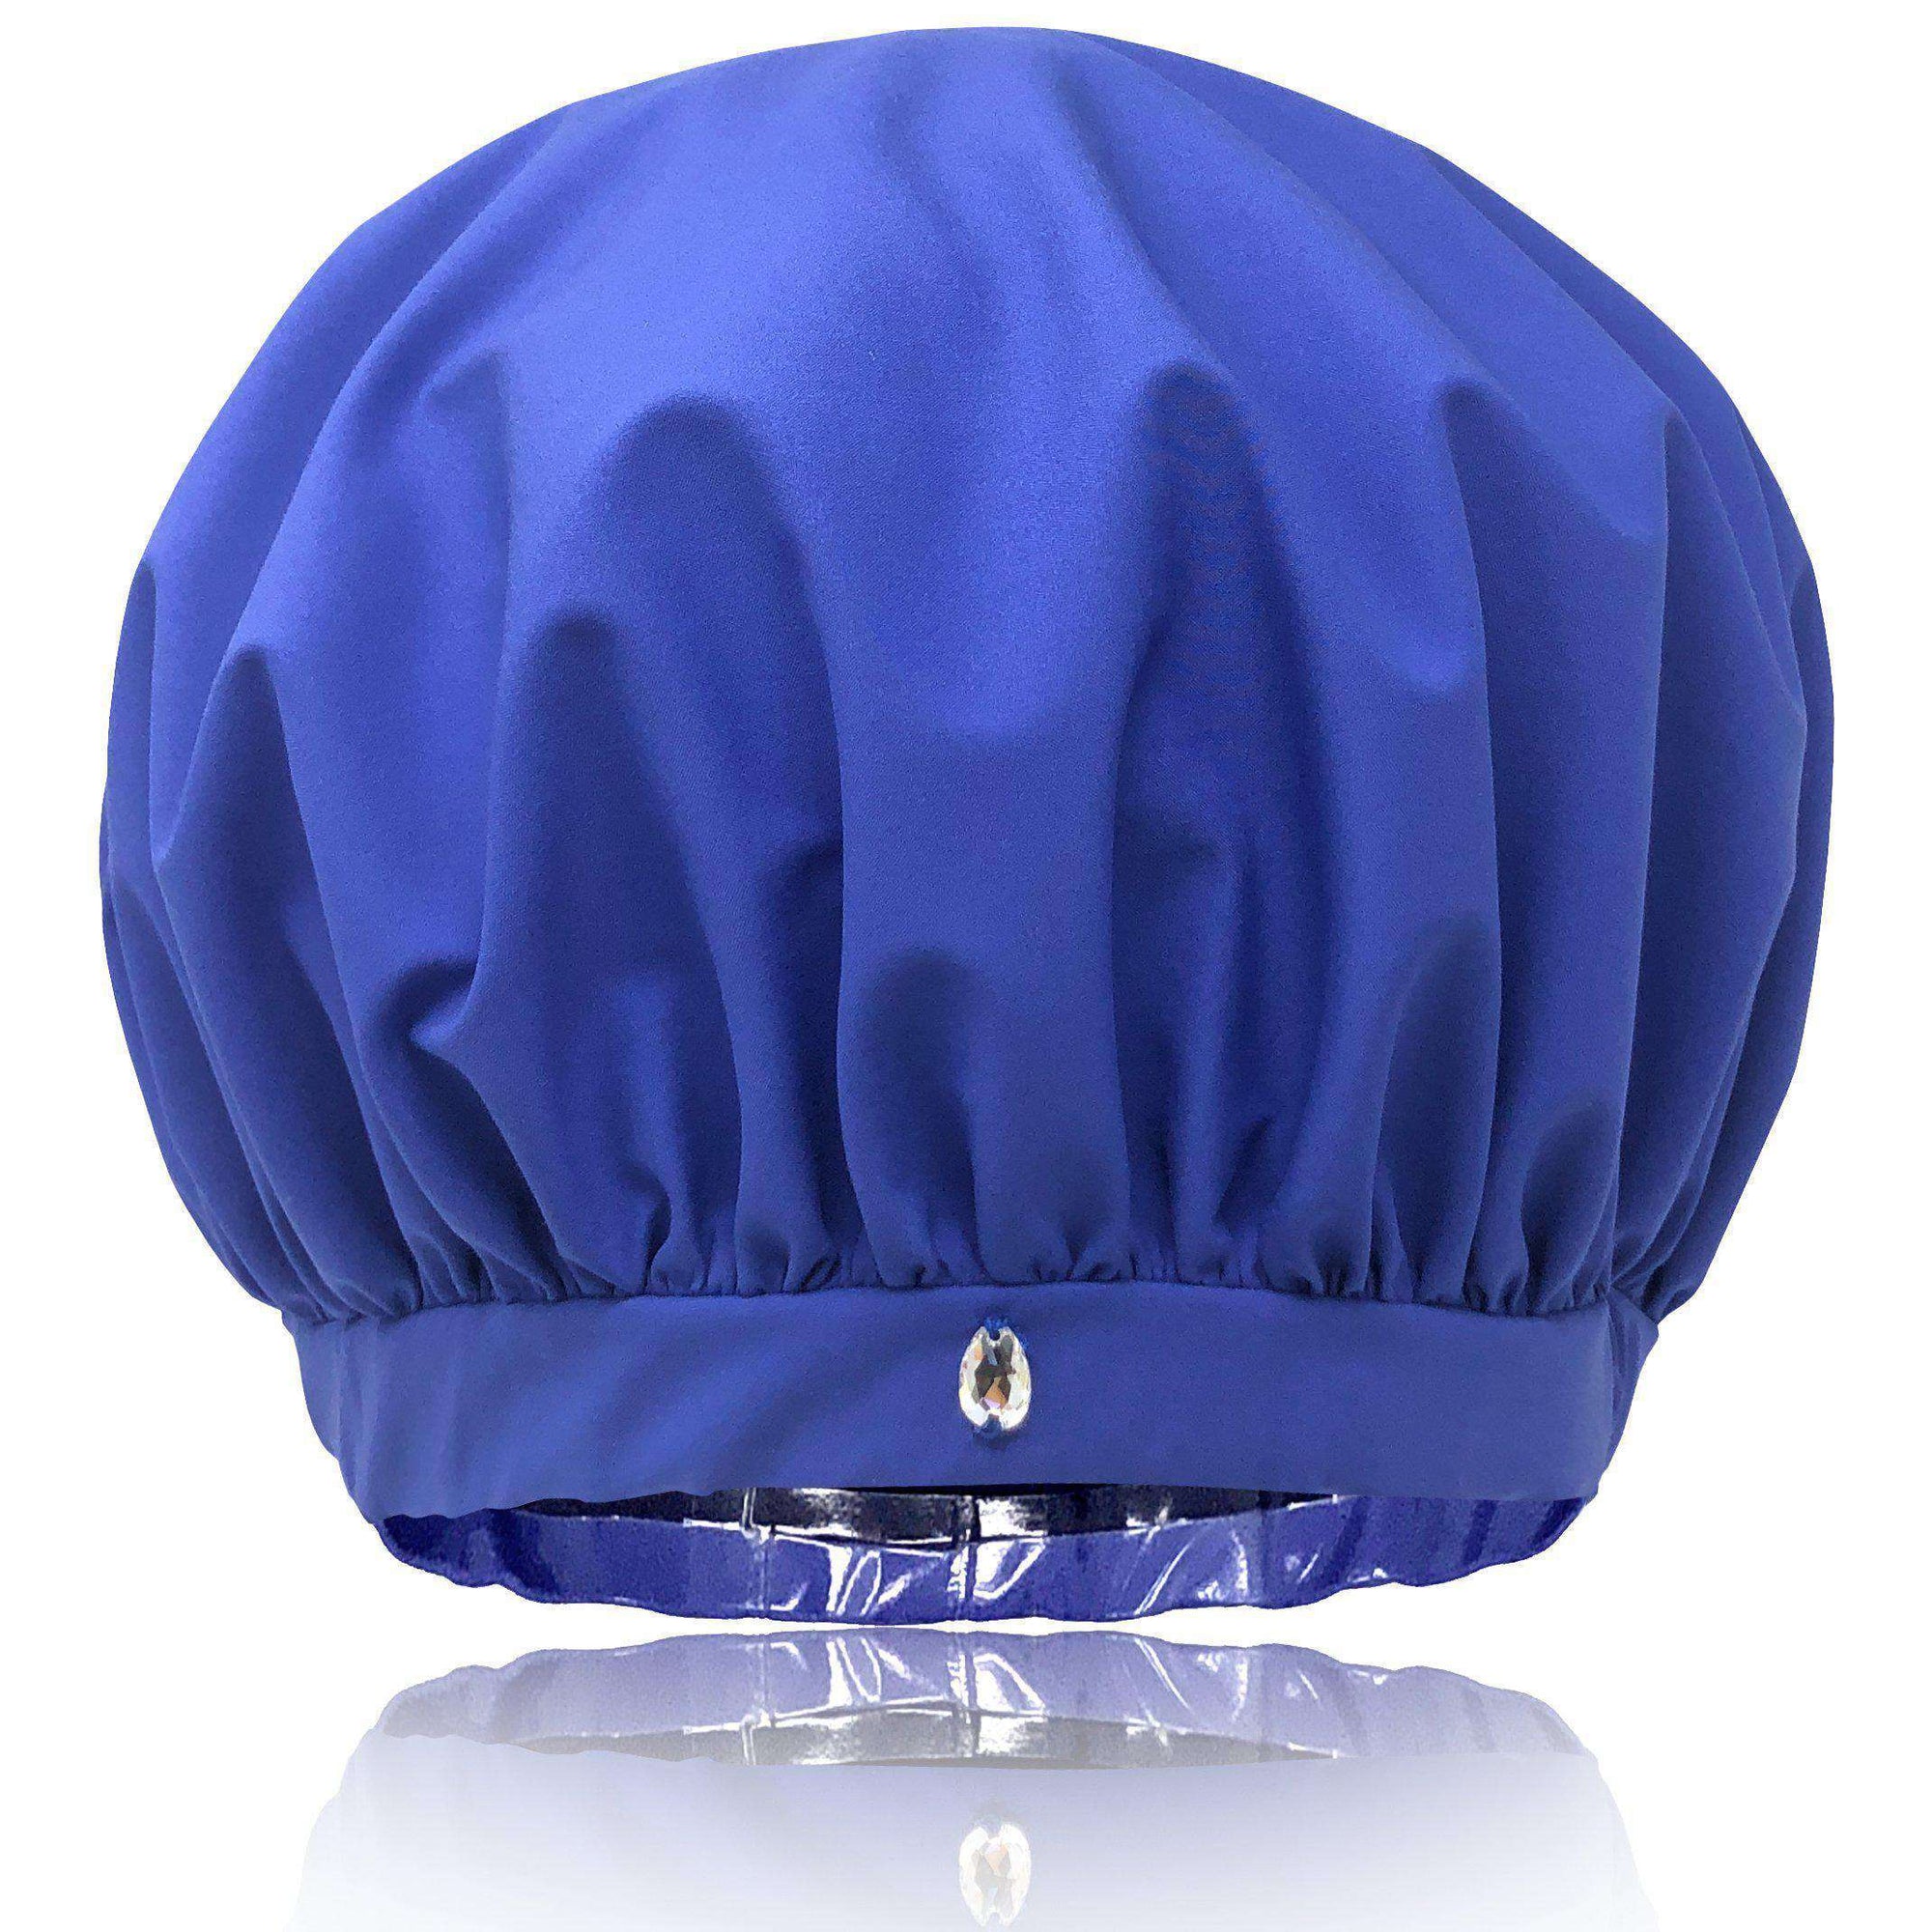 best oversized large shower cap for long hair curls women XL Superpower waterproof breathable fabric stops frizzing